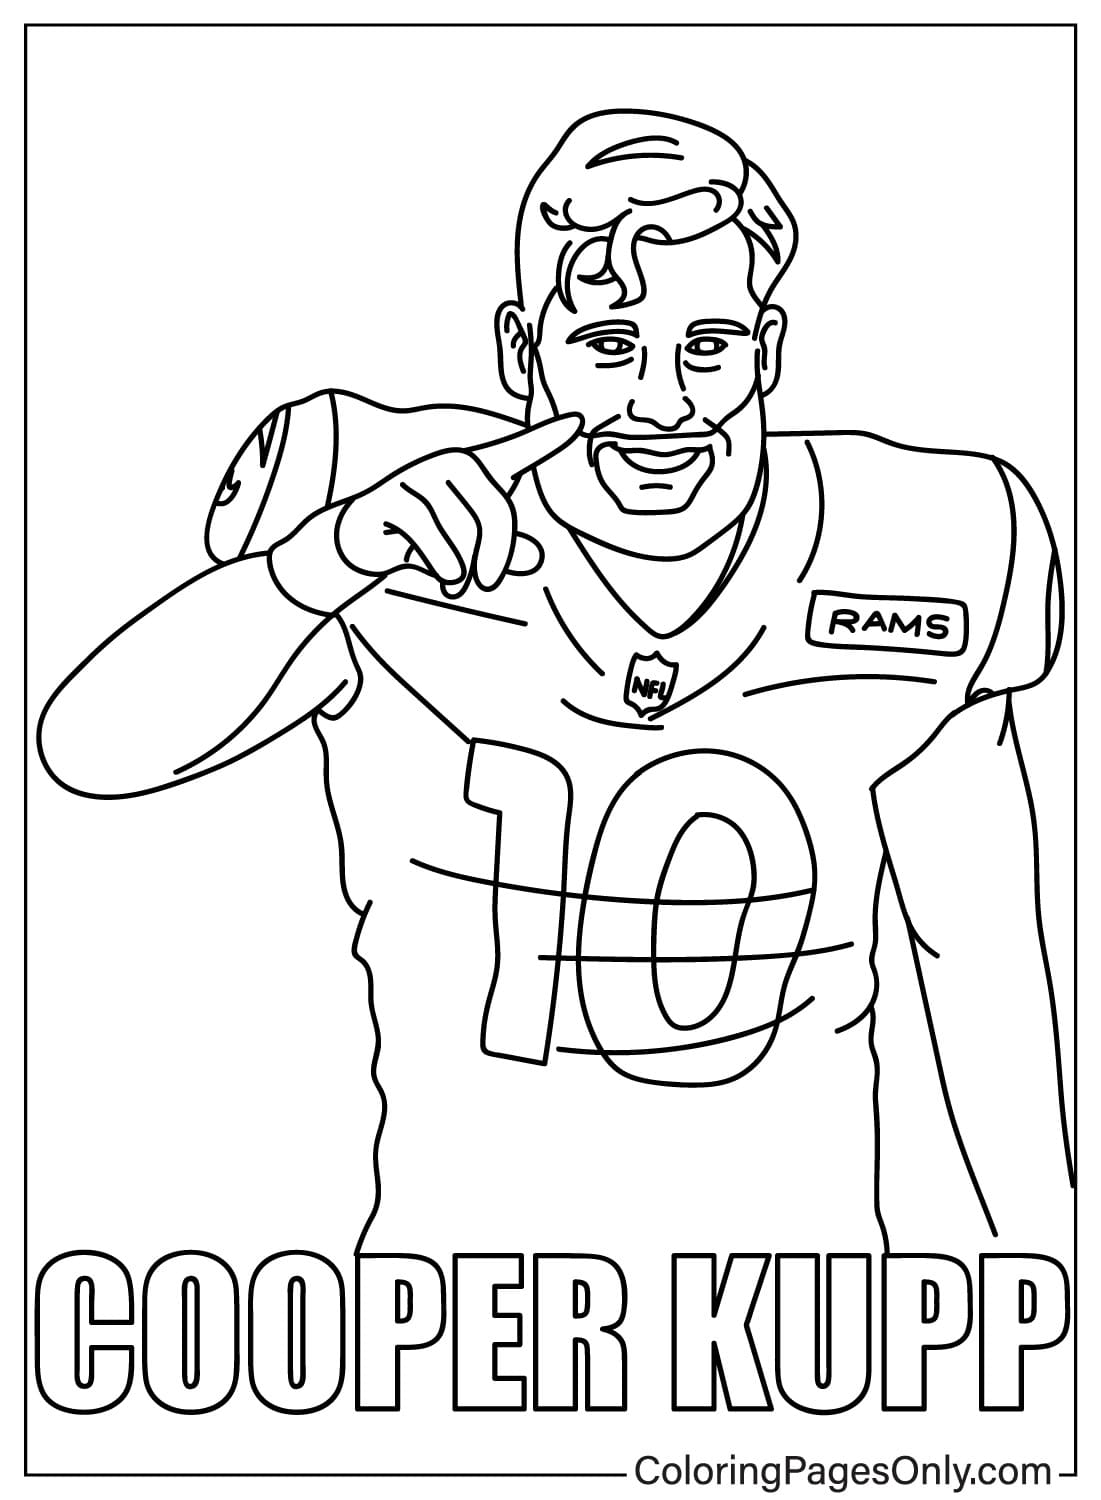 Cooper Kupp Coloring Page - Free ...